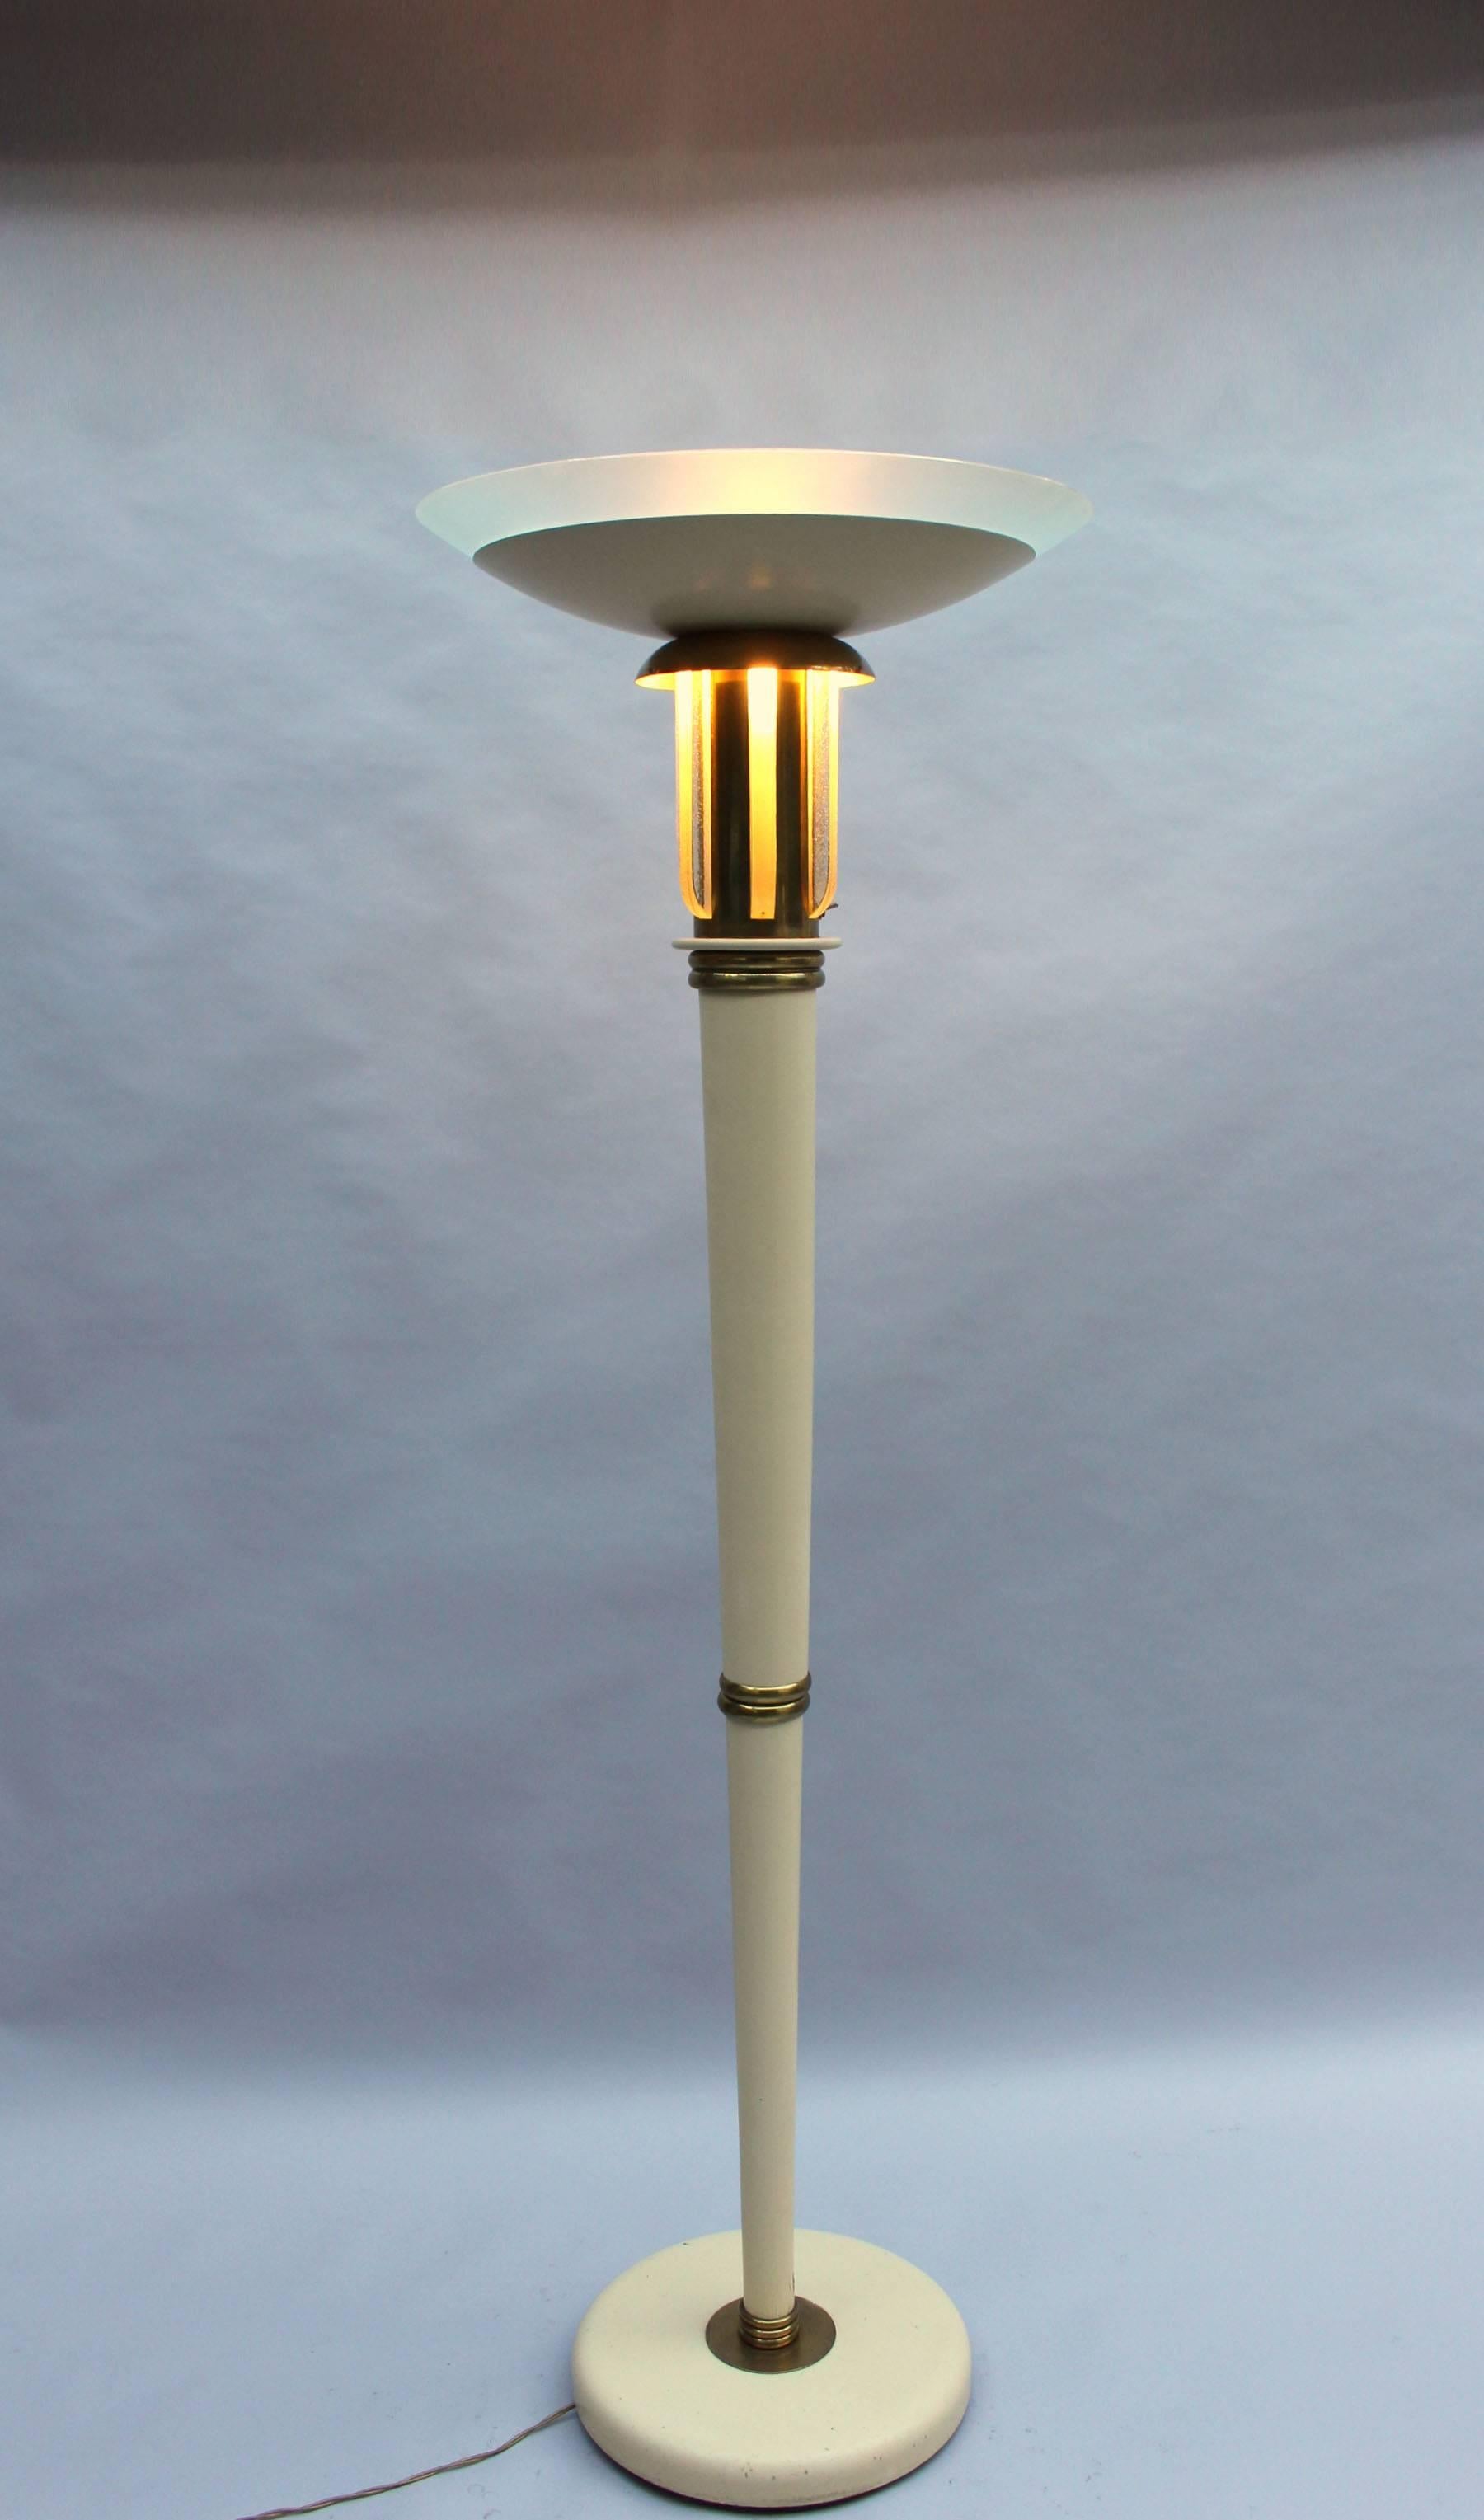 Fine French Art Deco Lacquered Floor Lamp with Glass and Brass details In Good Condition For Sale In Long Island City, NY